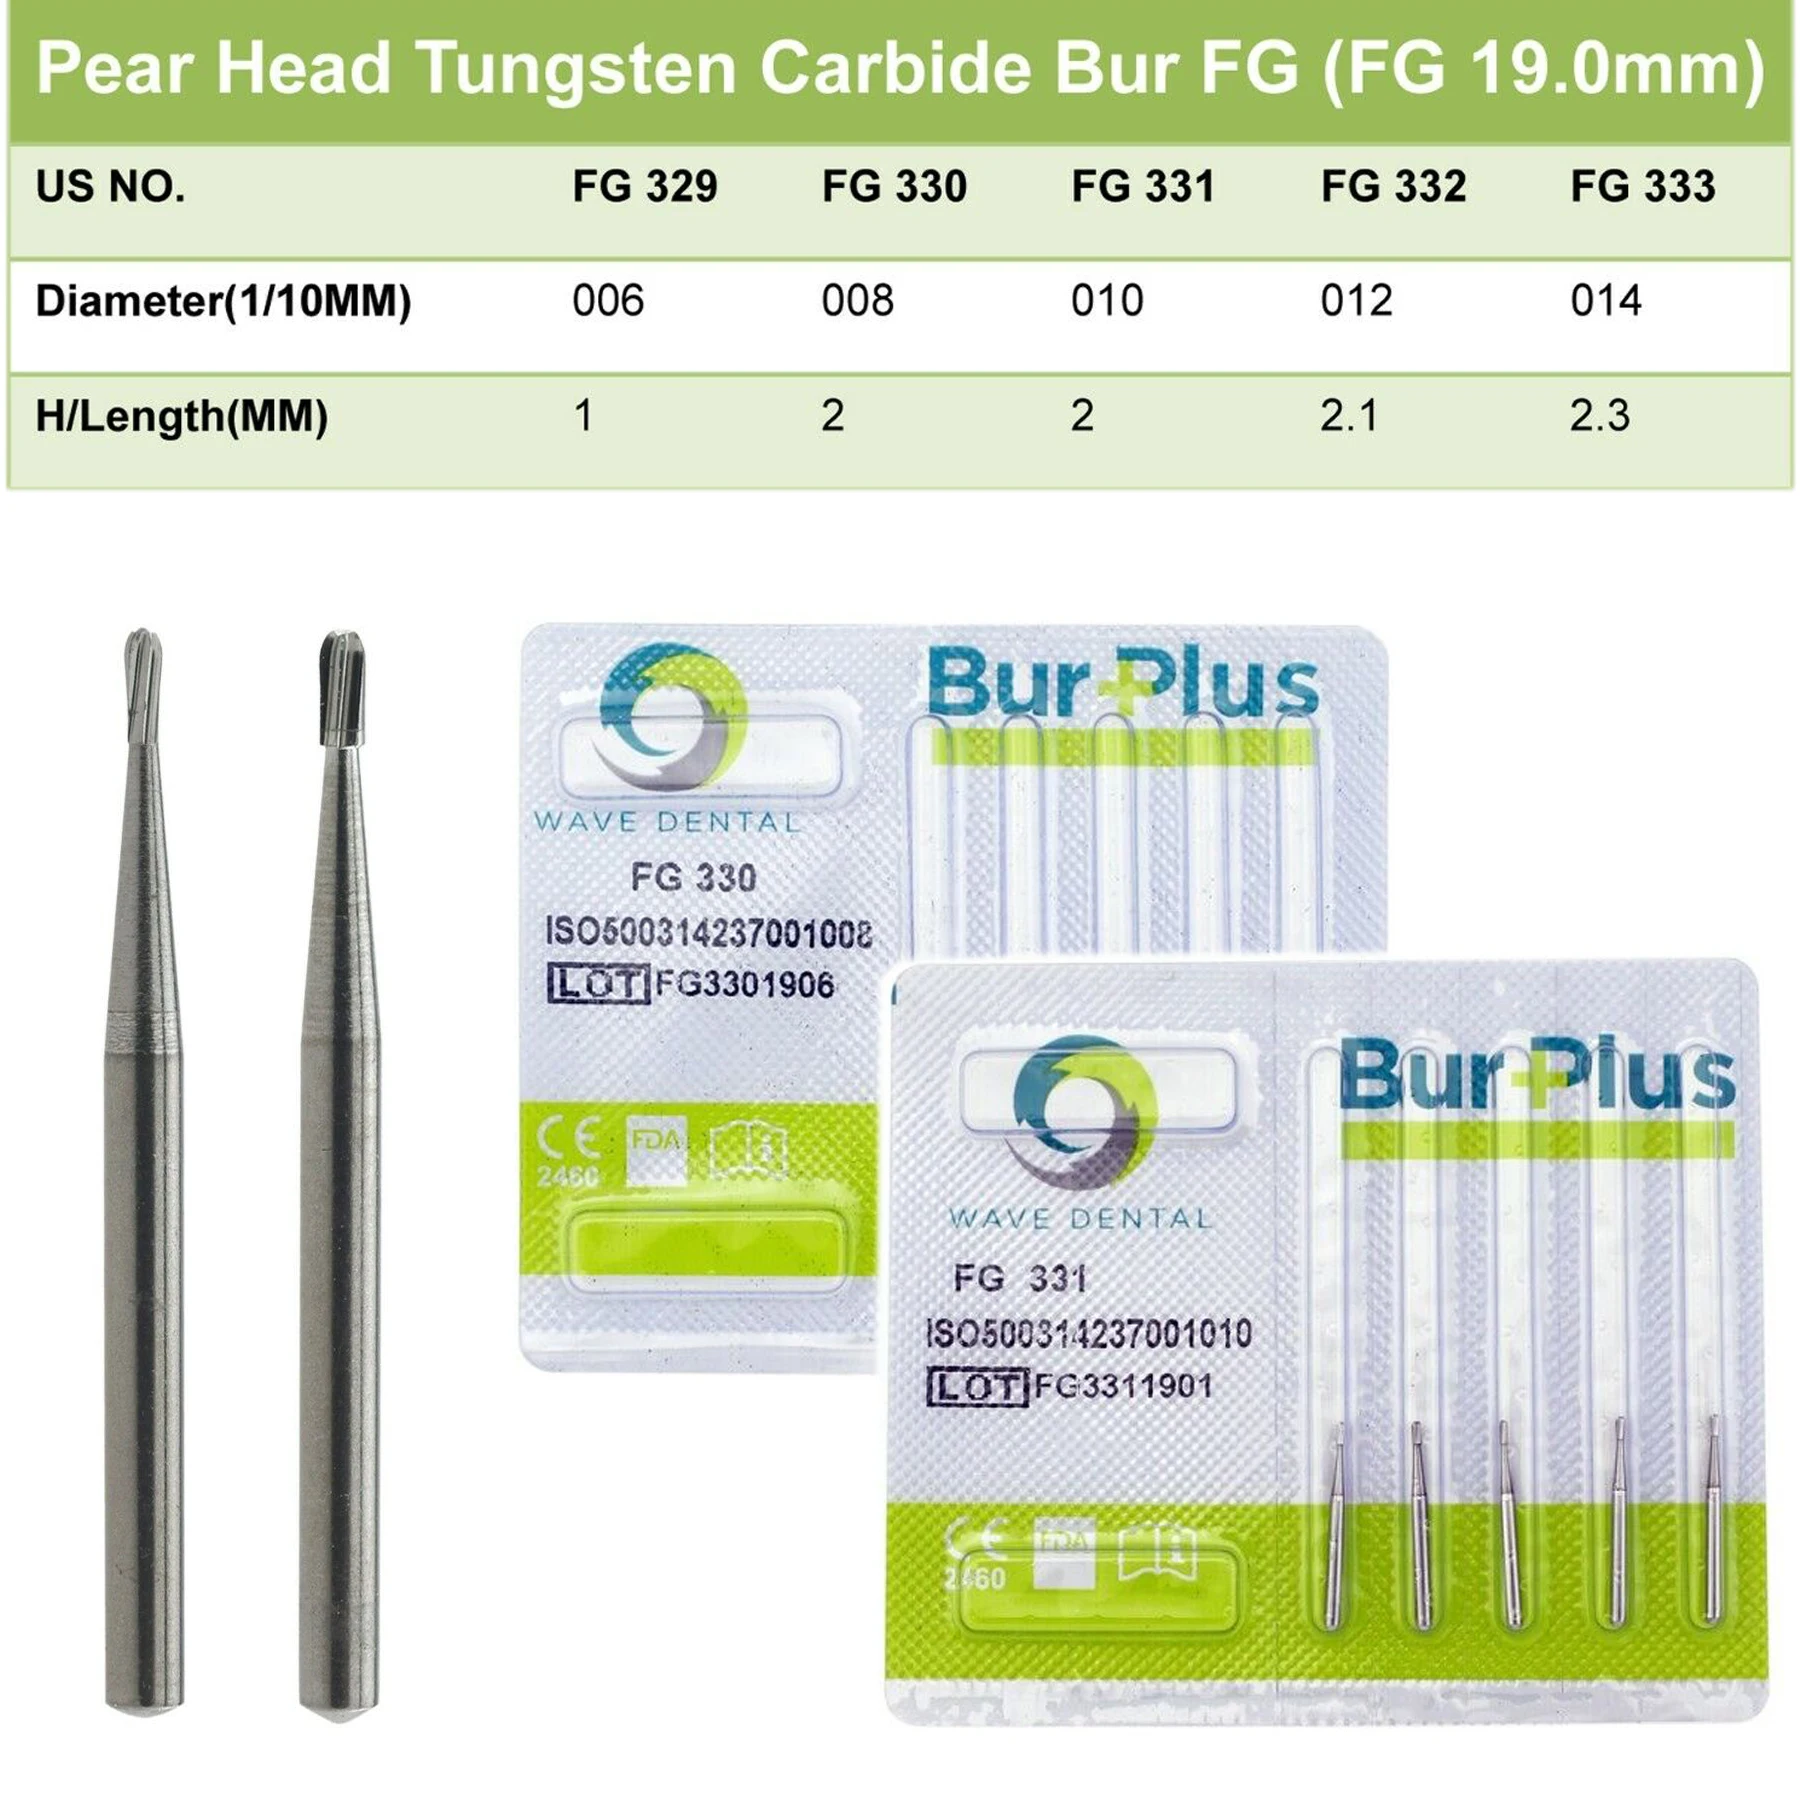 

PRIMA WAVE Dental Tungsten Carbide Burs Midwest Pear Head Type FG330/331 for High Speed Handpiece Dia.1.6mm 5Pcs/Pack